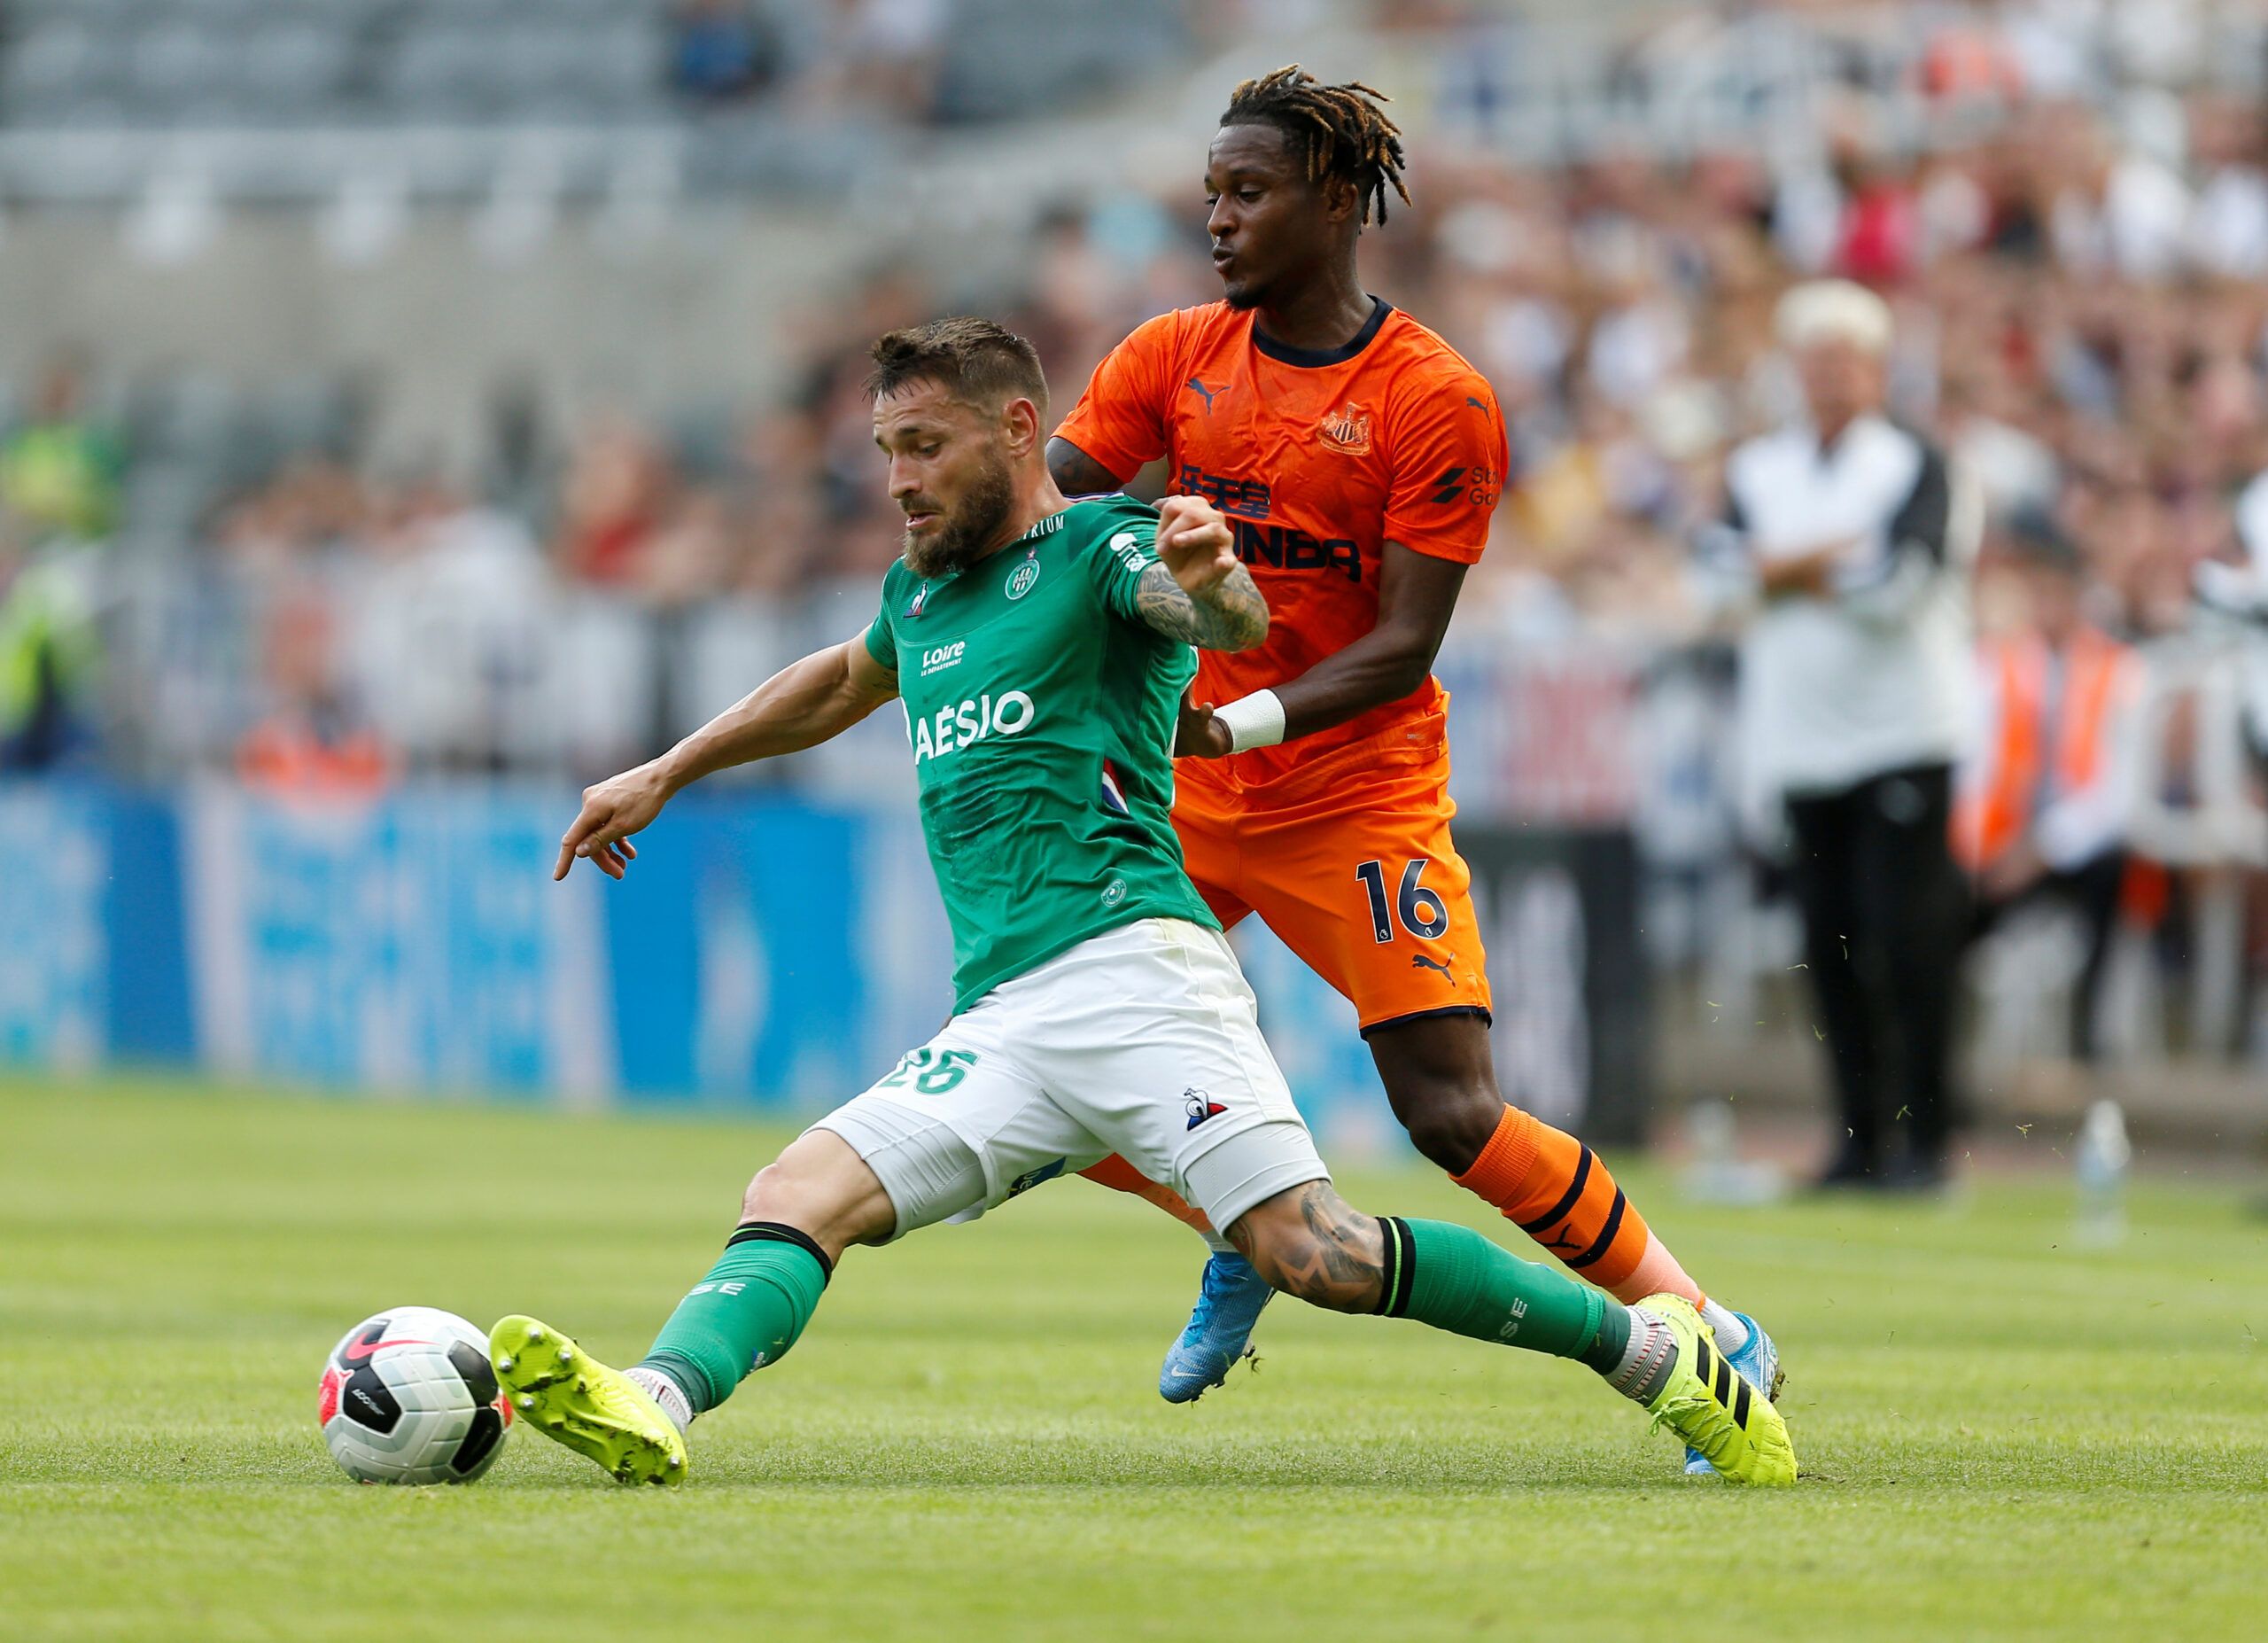 Soccer Football - Pre Season Friendly - Newcastle United v St Etienne - St James' Park, Newcastle, Britain - August 3, 2019   Newcastle United's Rolando Aarons in action with St Etienne's Mathieu Debuchy   Action Images via Reuters/Craig Brough